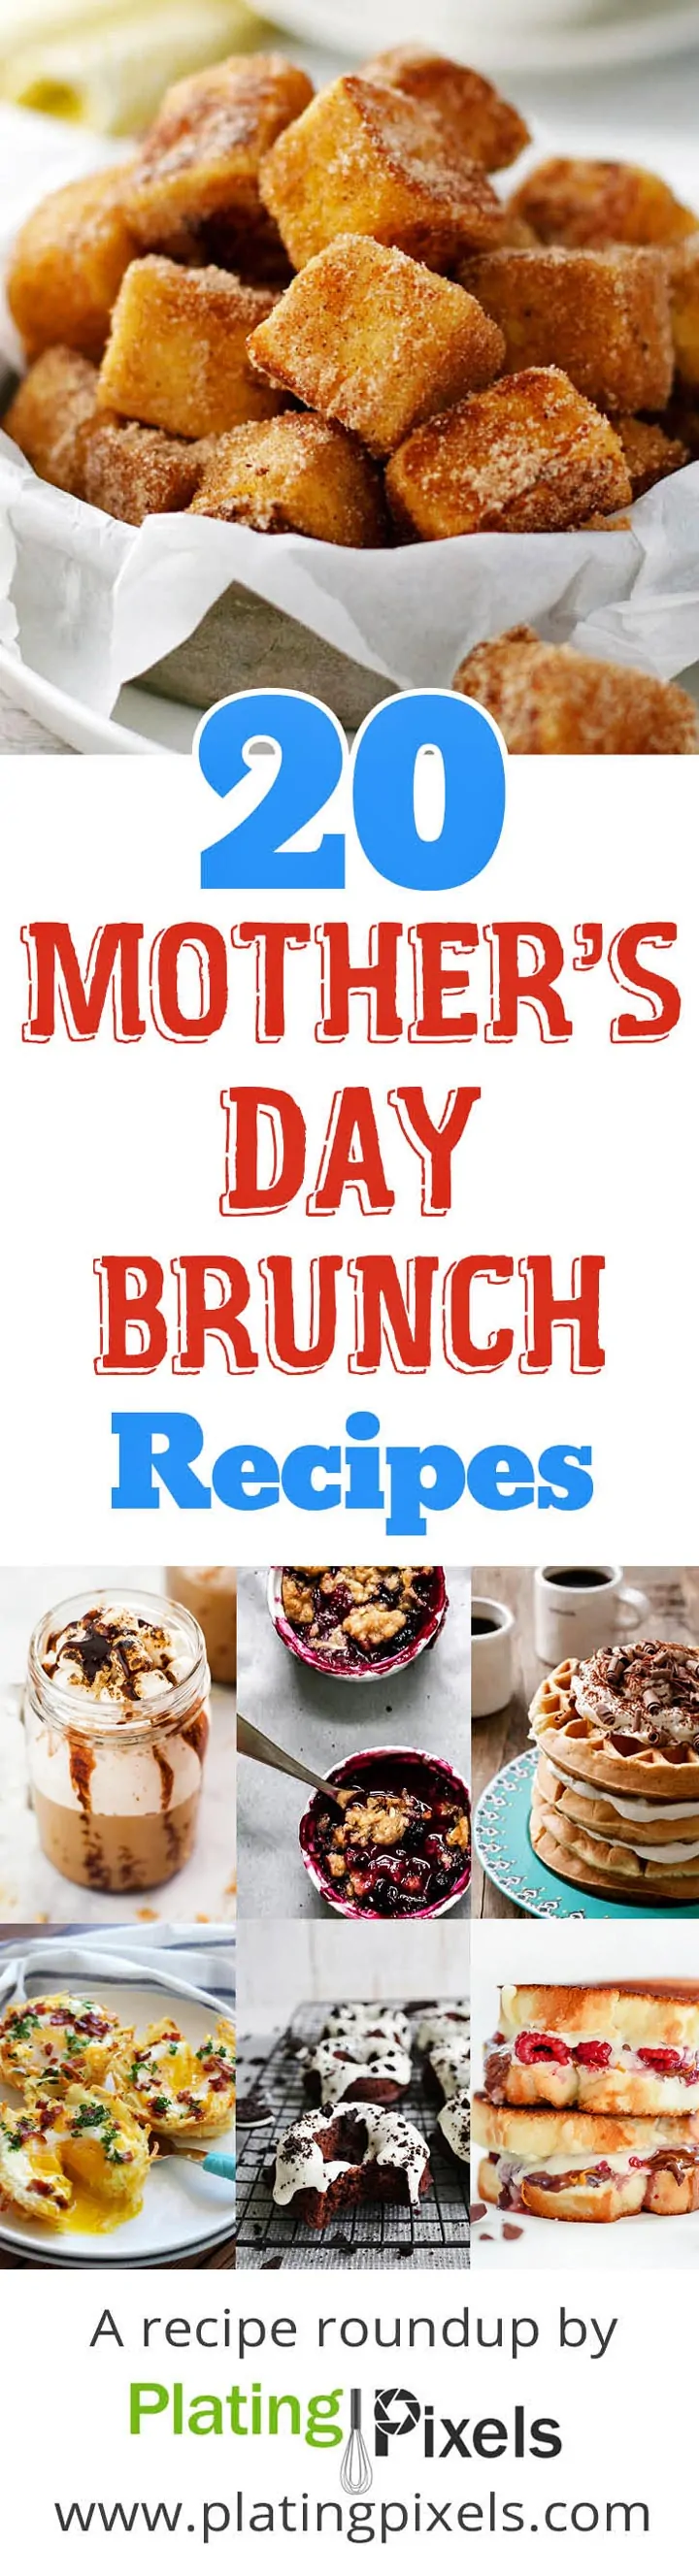 20 Mother's Day Brunch Recipes roundup image collage with text